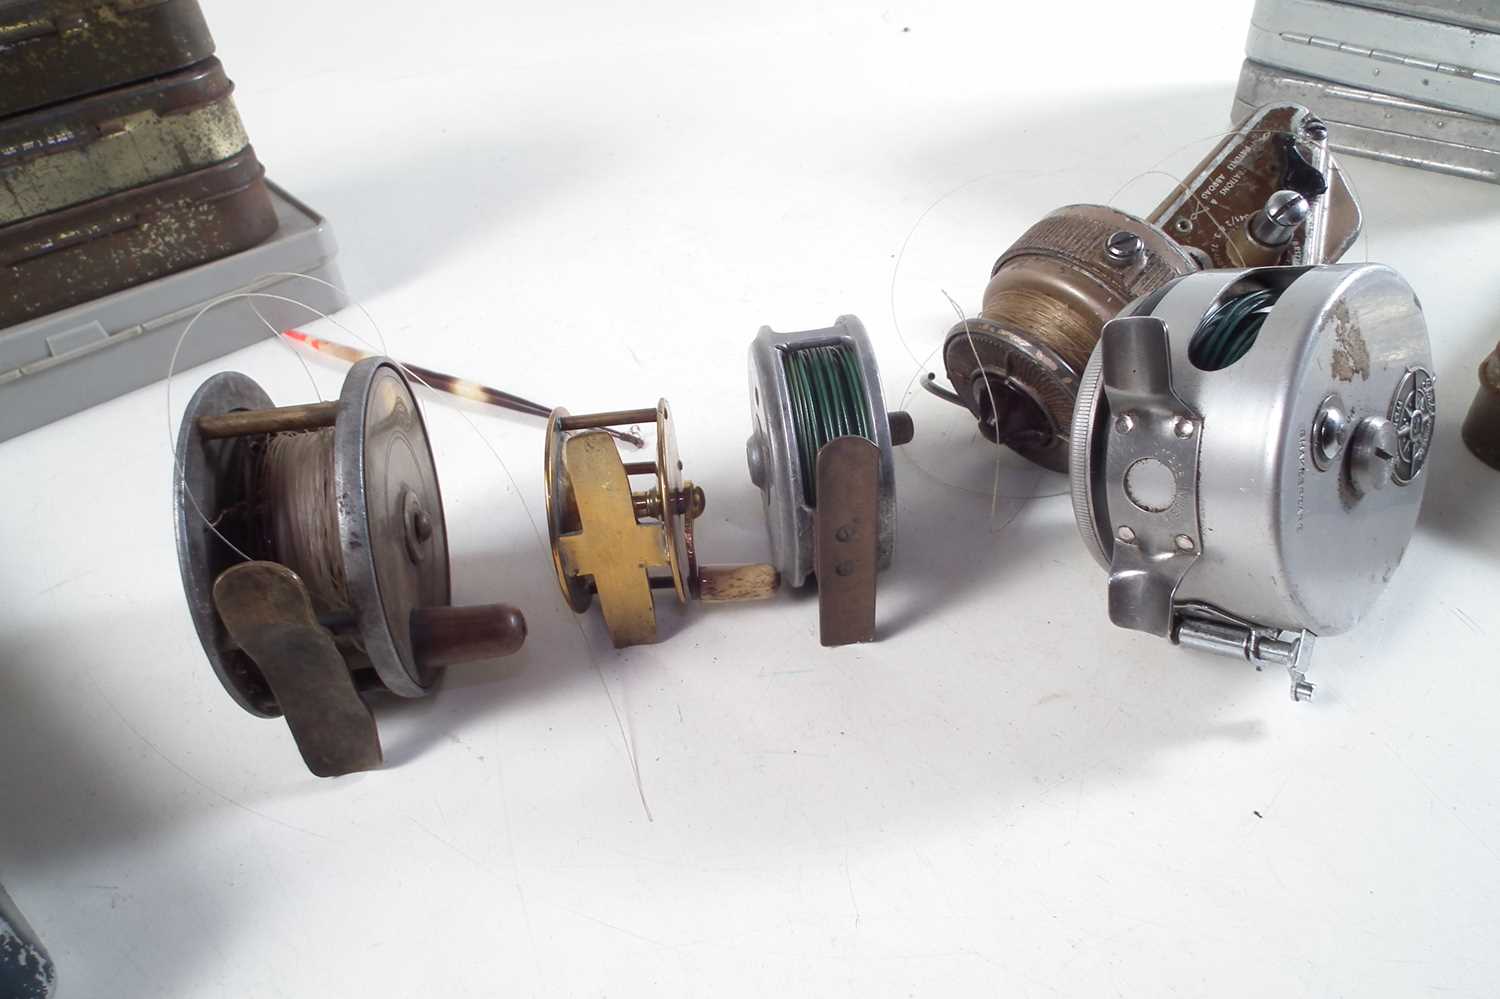 Two Hardy reels and related fishing vintage tackle - Image 16 of 21